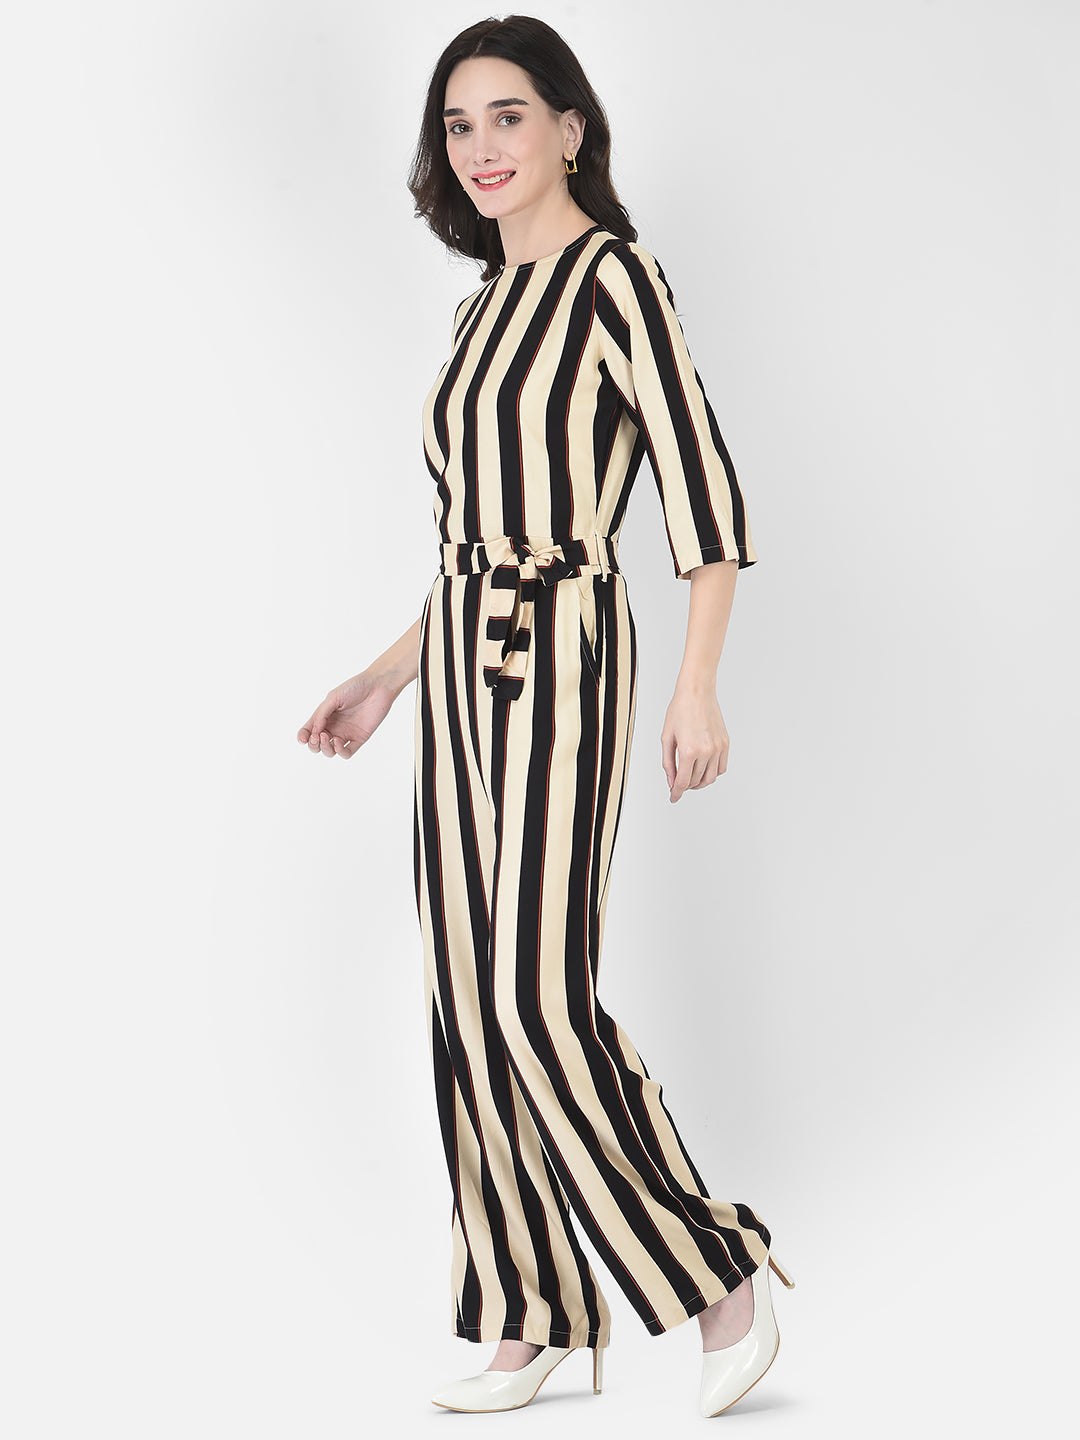 Bee Striped Jumpsuit - Women Dungarees